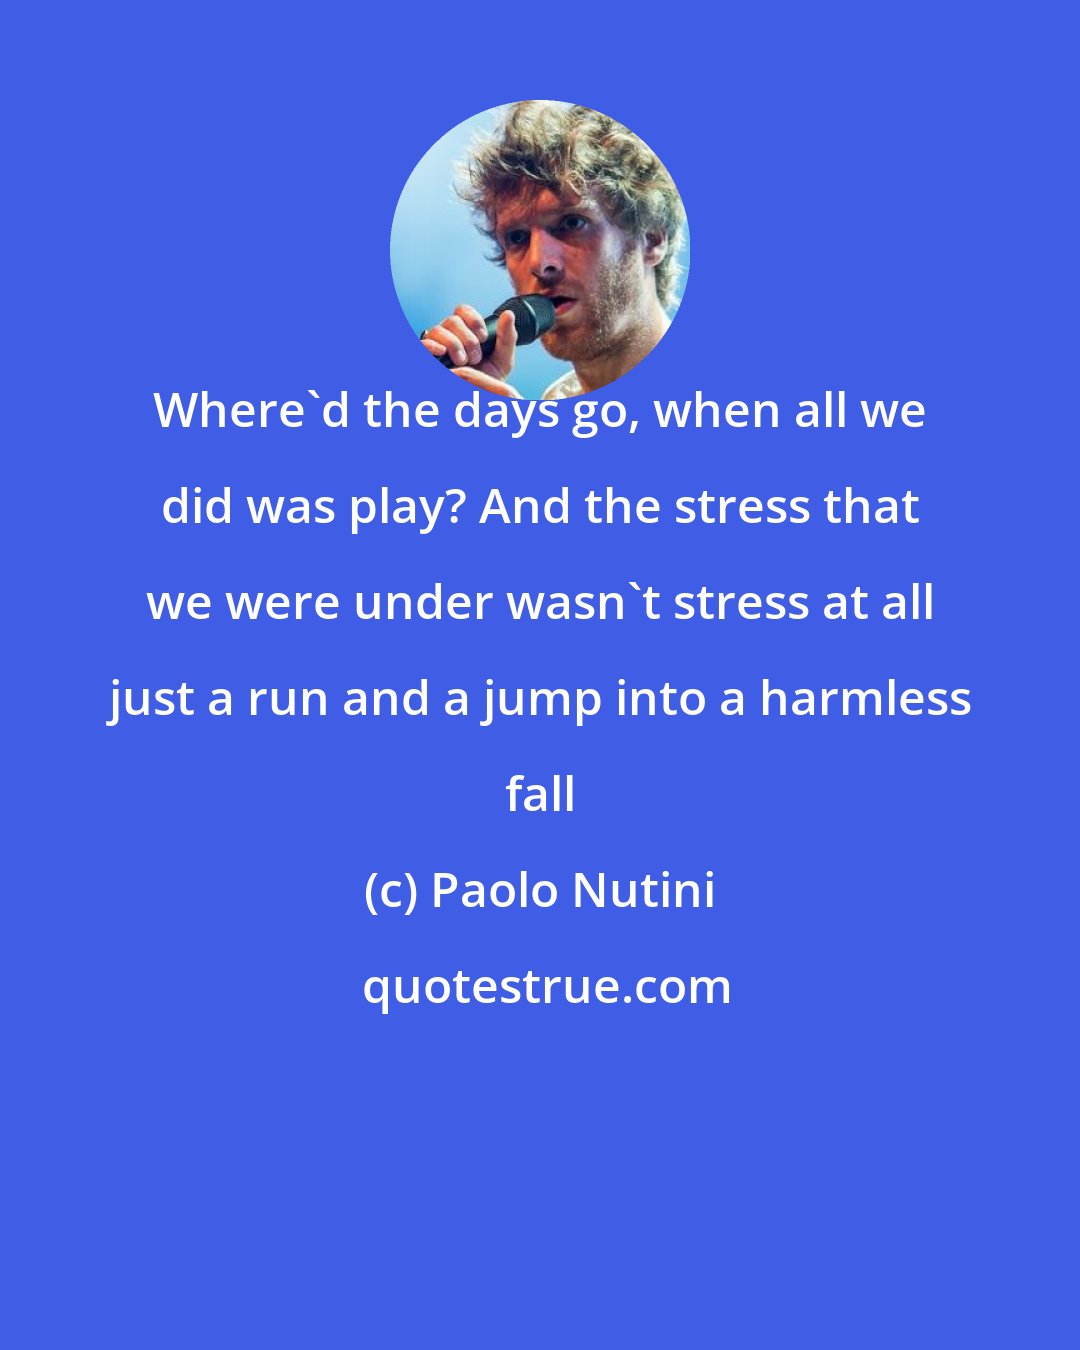 Paolo Nutini: Where'd the days go, when all we did was play? And the stress that we were under wasn't stress at all just a run and a jump into a harmless fall